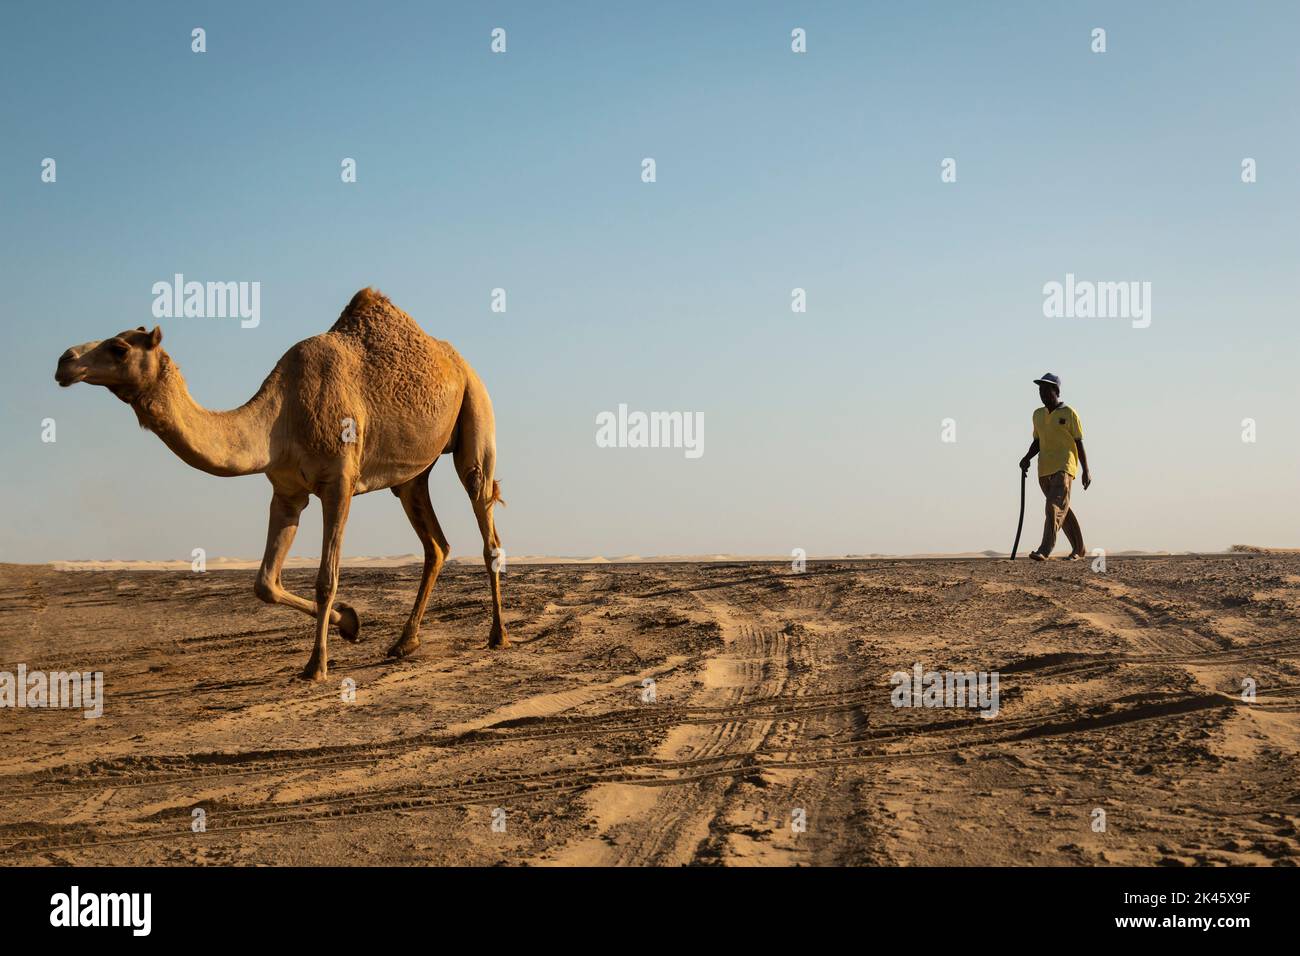 Camels walking through the desert with his caretaker Stock Photo